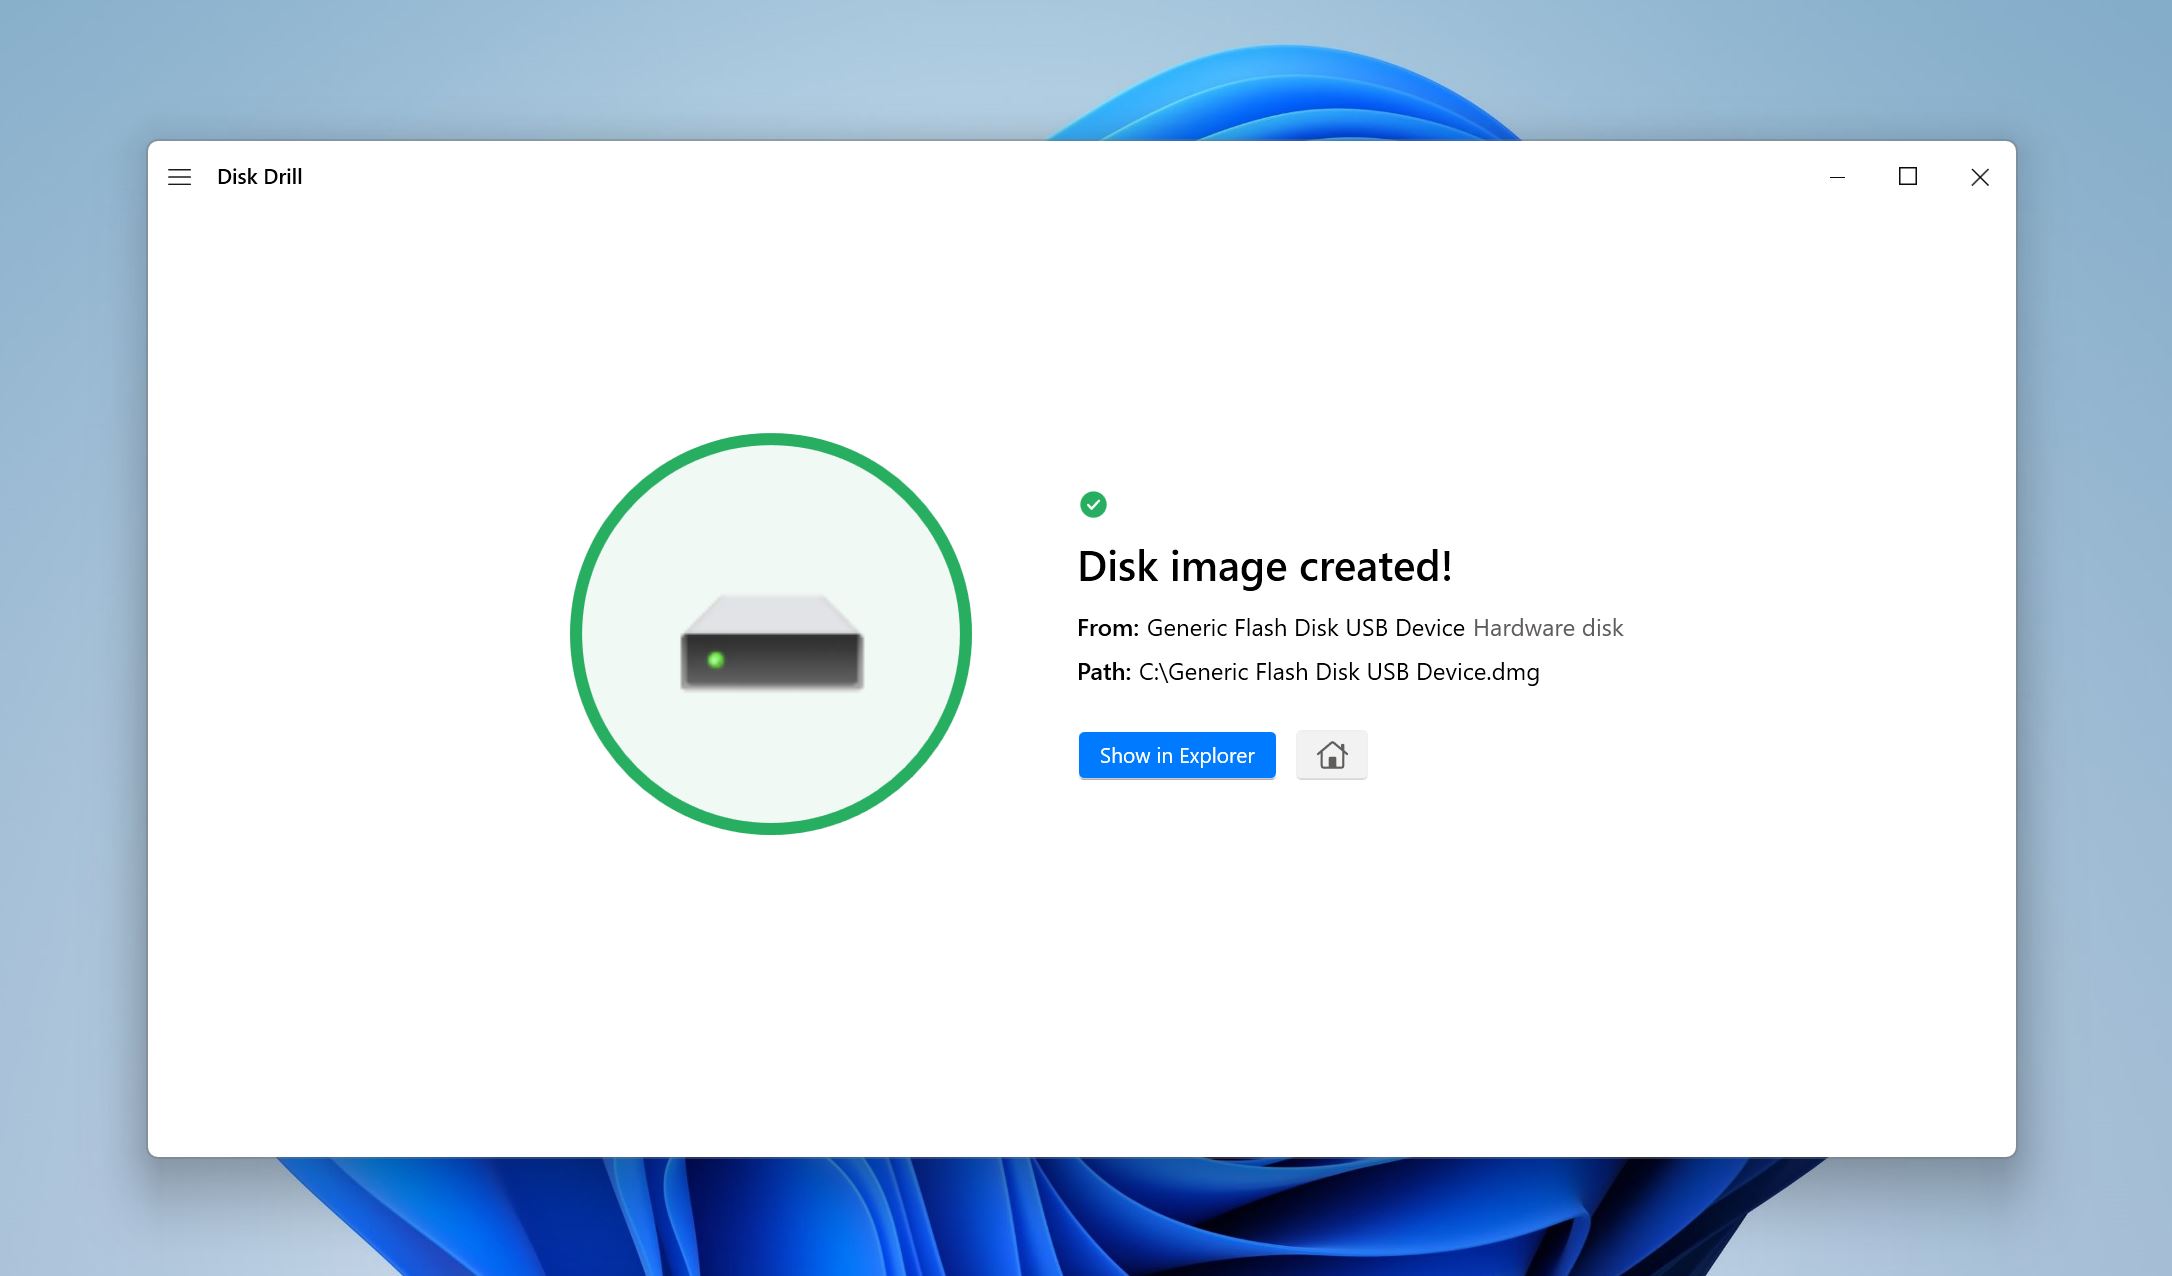 Disk image created screen.